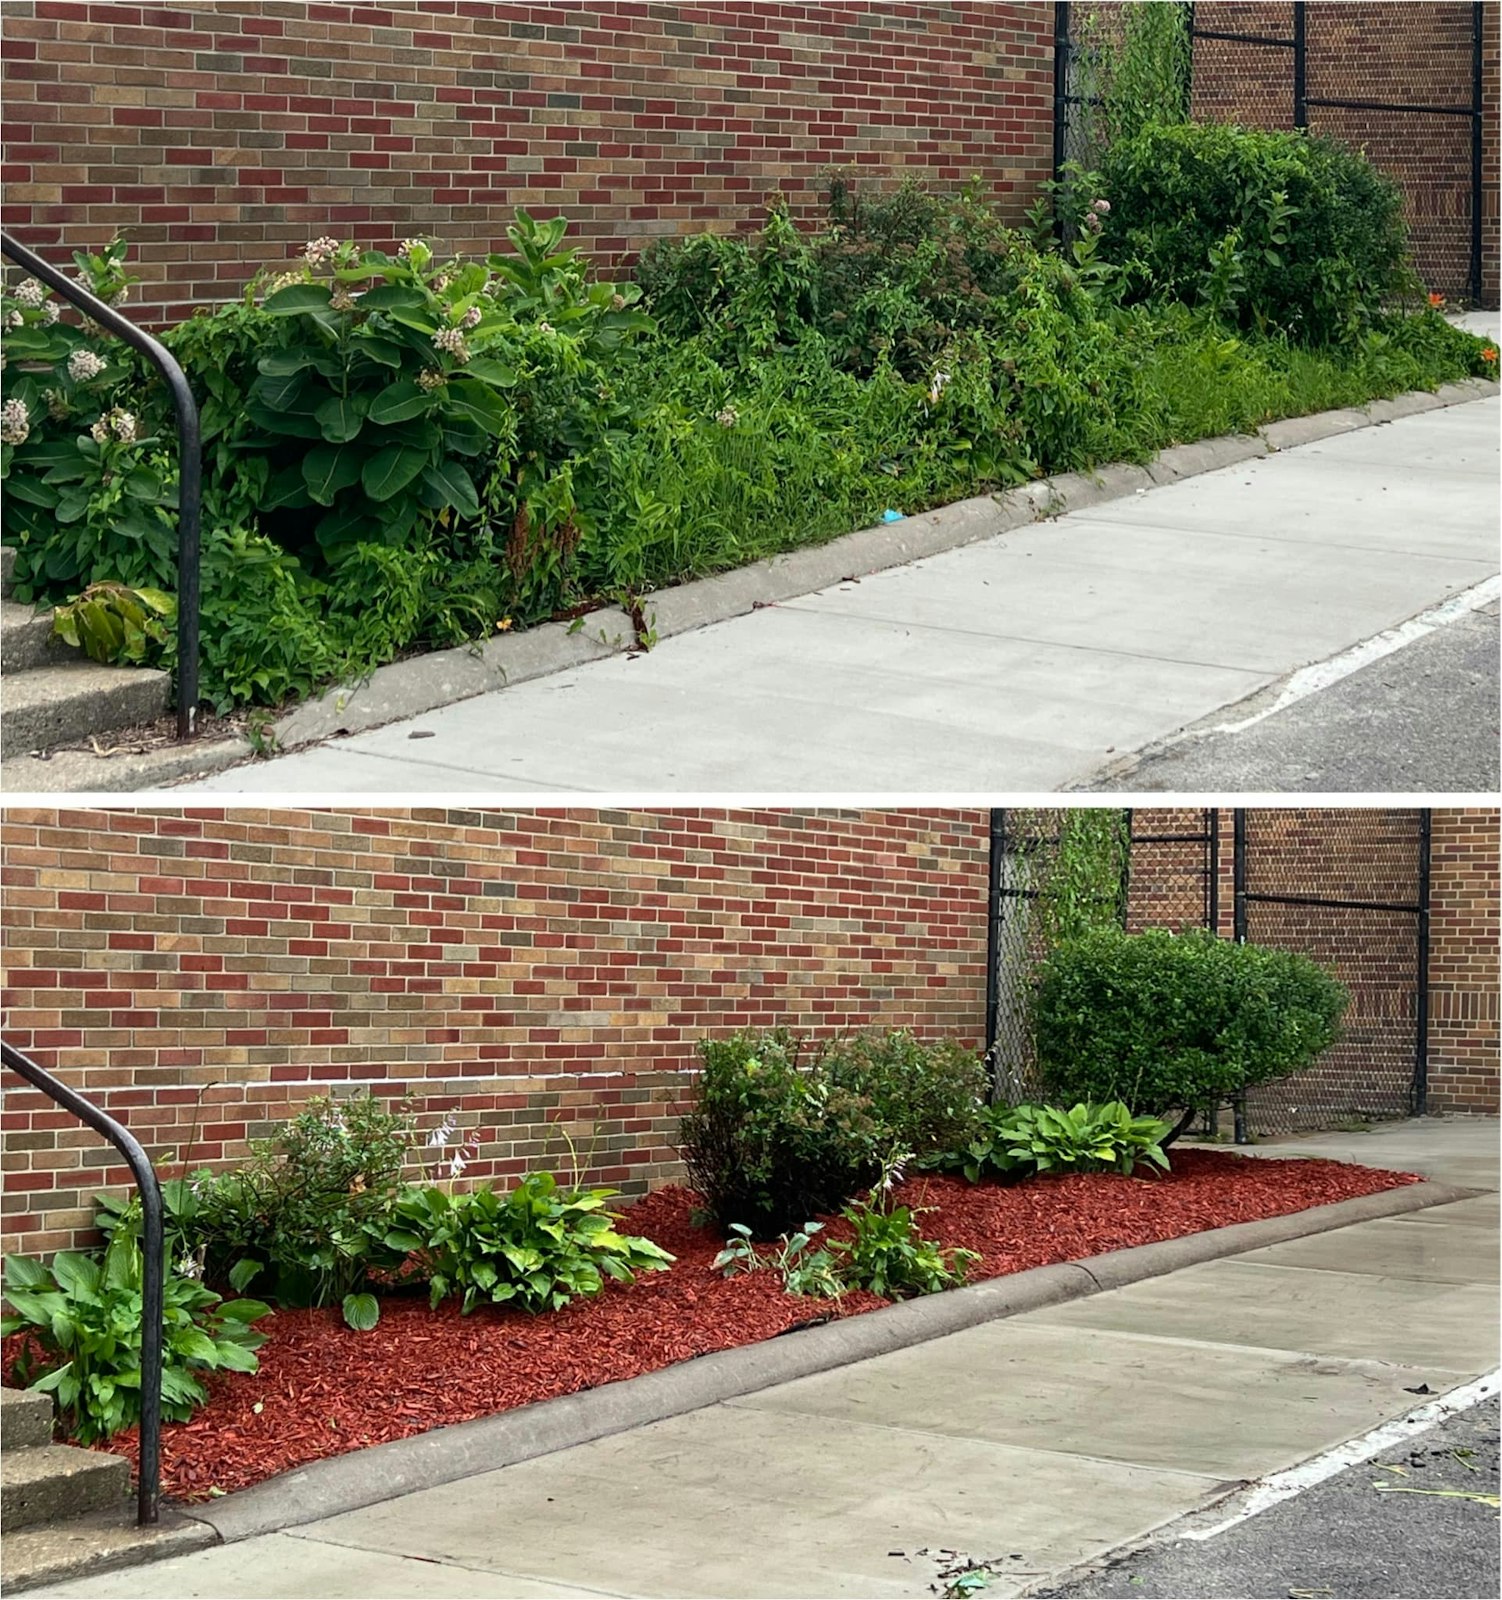 A before and after shot of the work the men did at Christ the King.